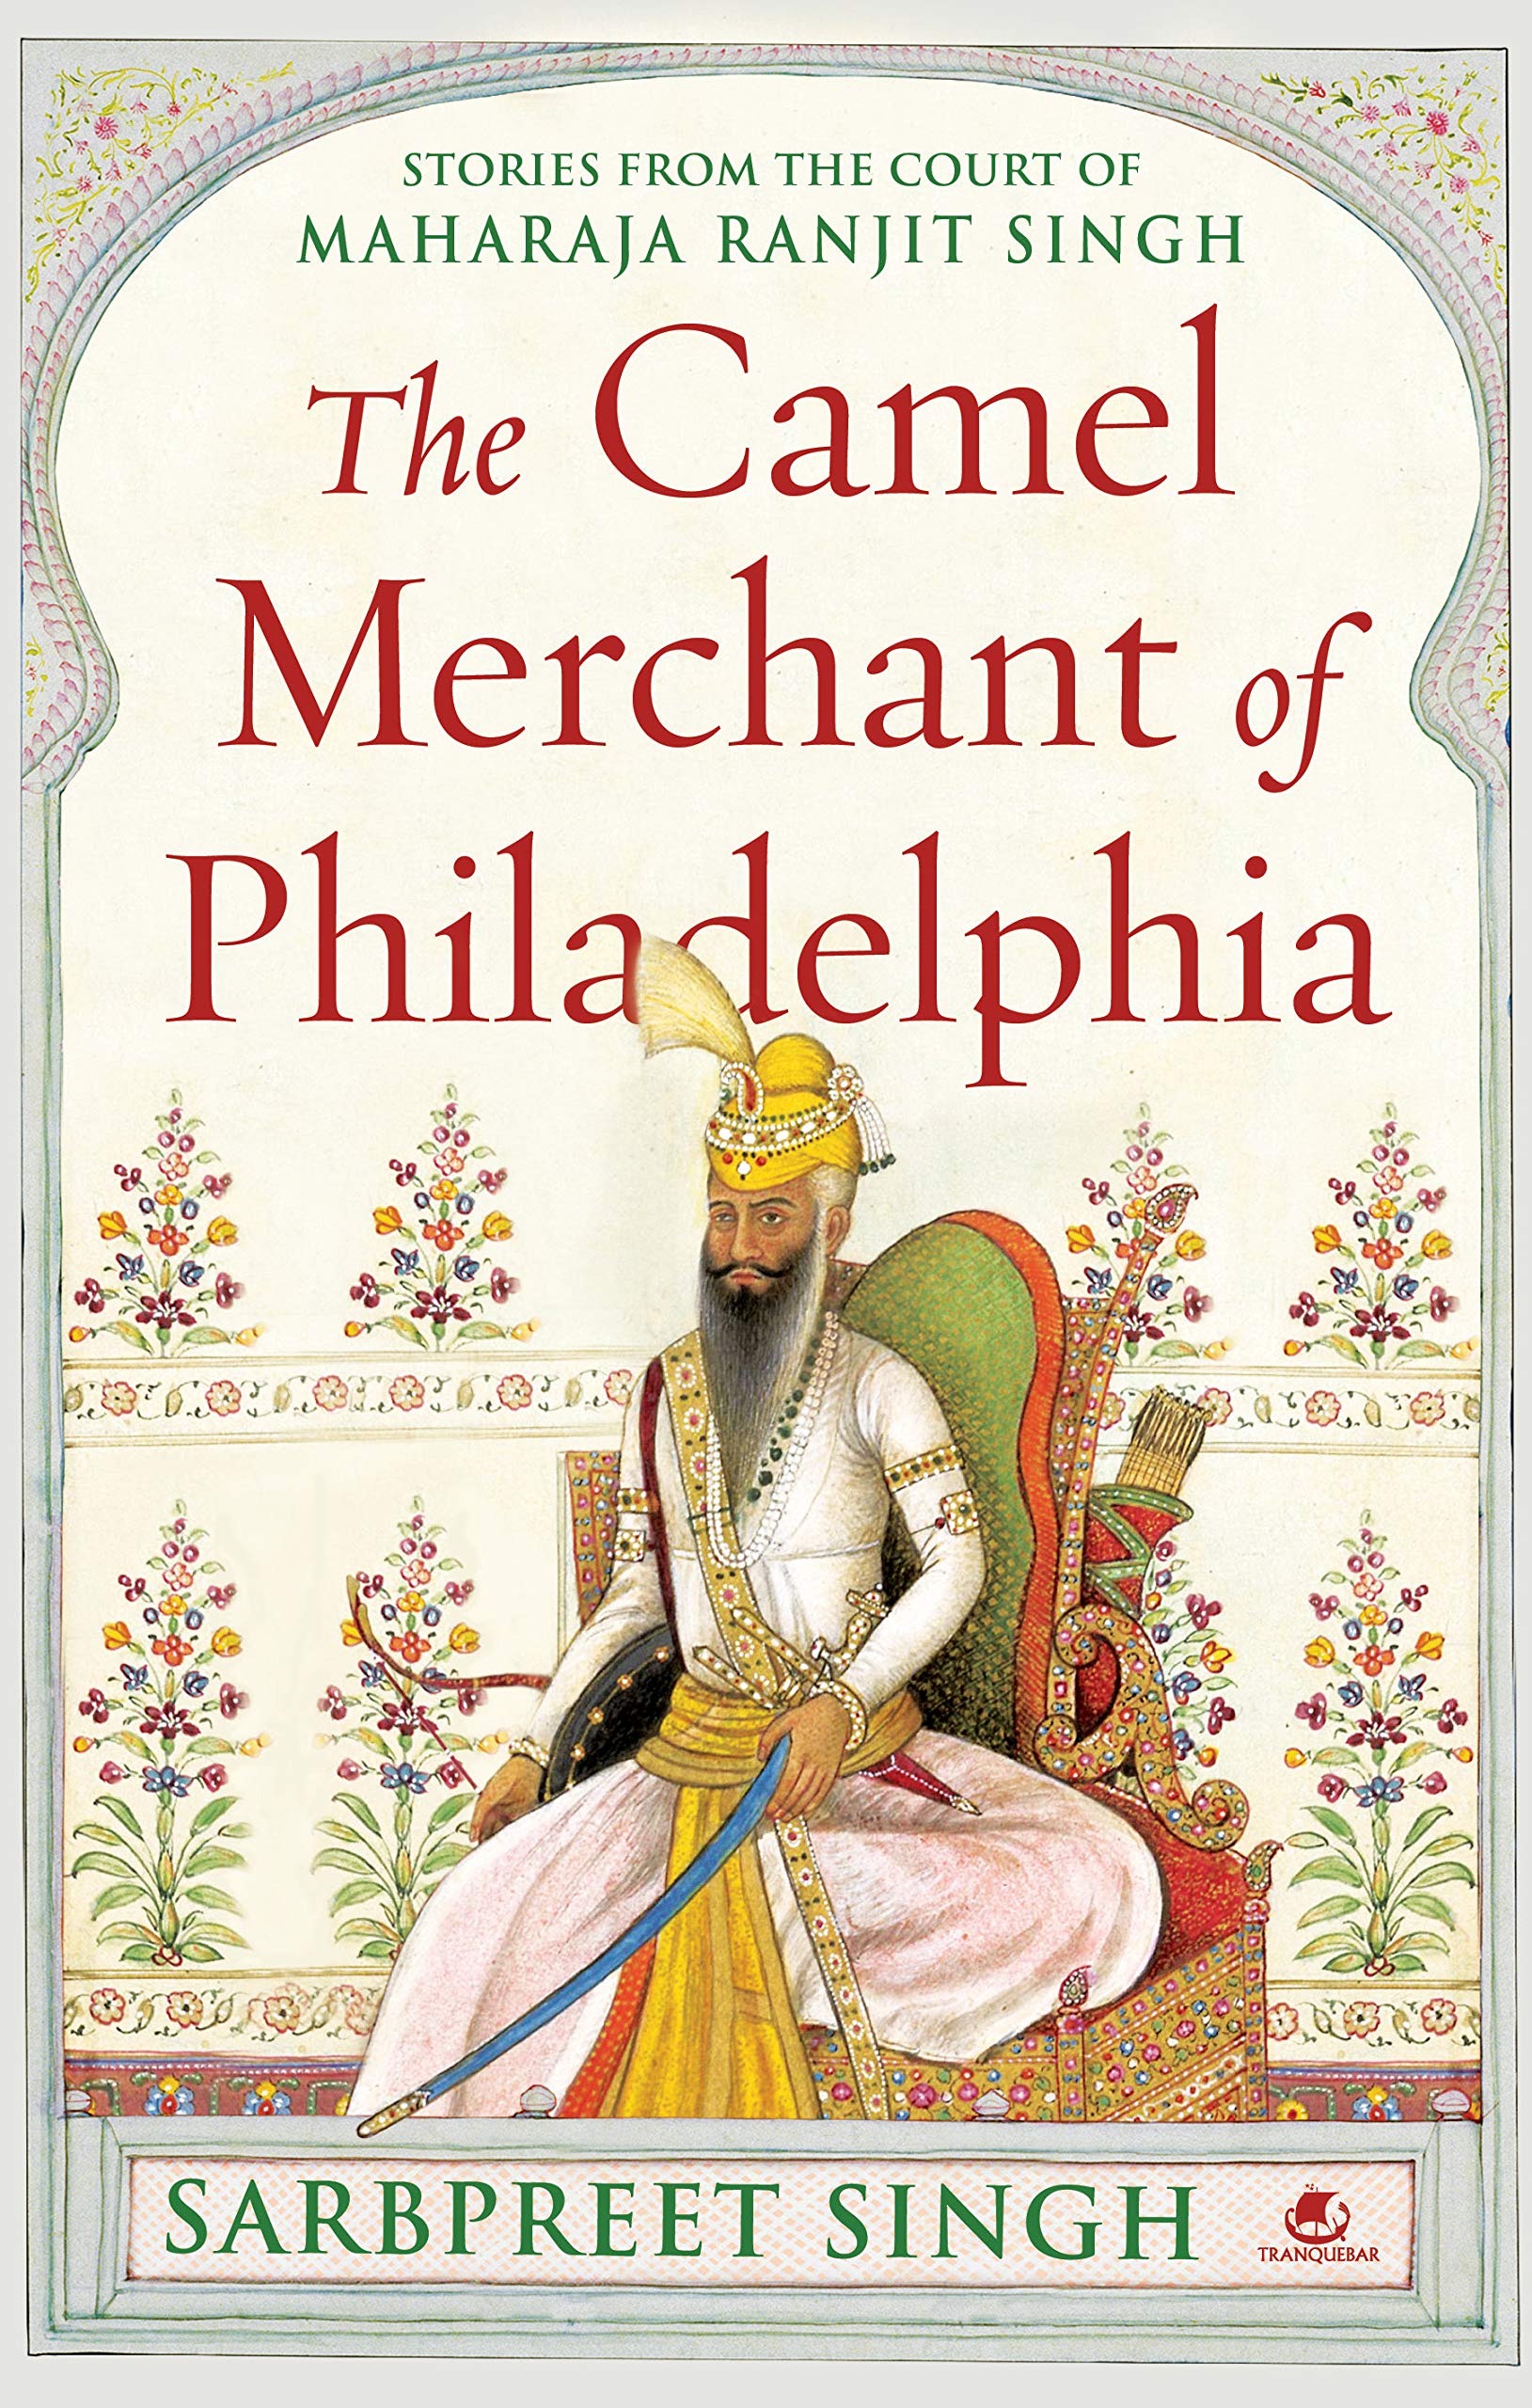 Sarbpreet Singh on "The Camel Merchant of Philadelphia": 'Maharaja Ranjit Singh’s court exemplifies the virtues of governing in a truly secular manner'